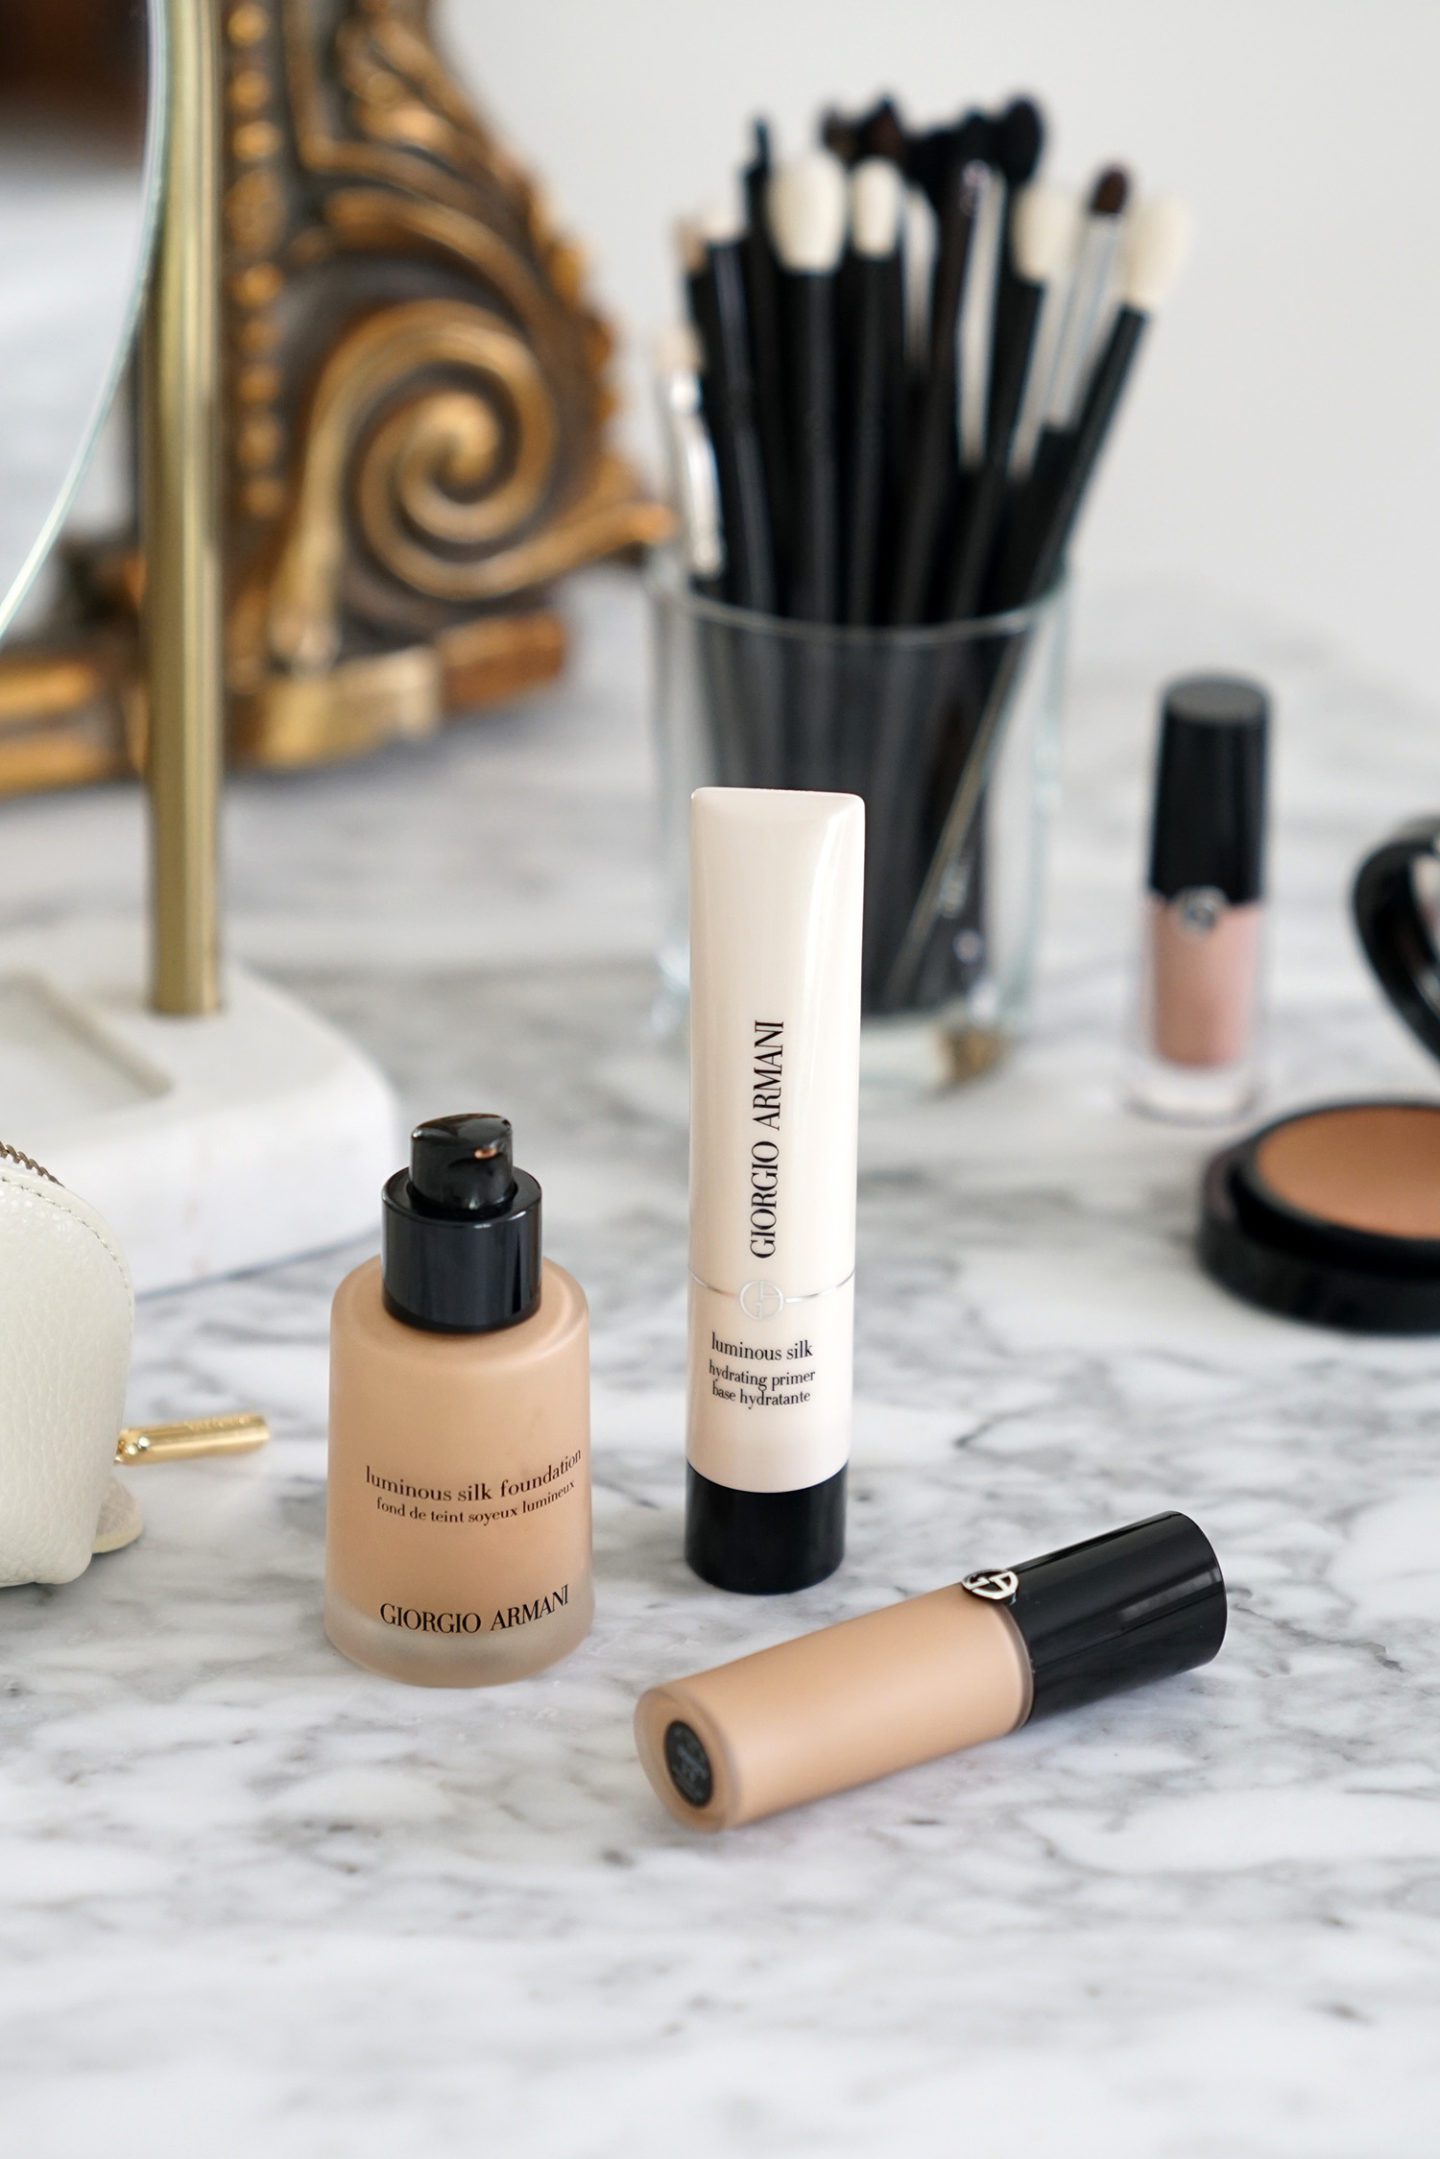 Armani Luminous Silk Foundation, Hydrating Primer and Concealer 6.5